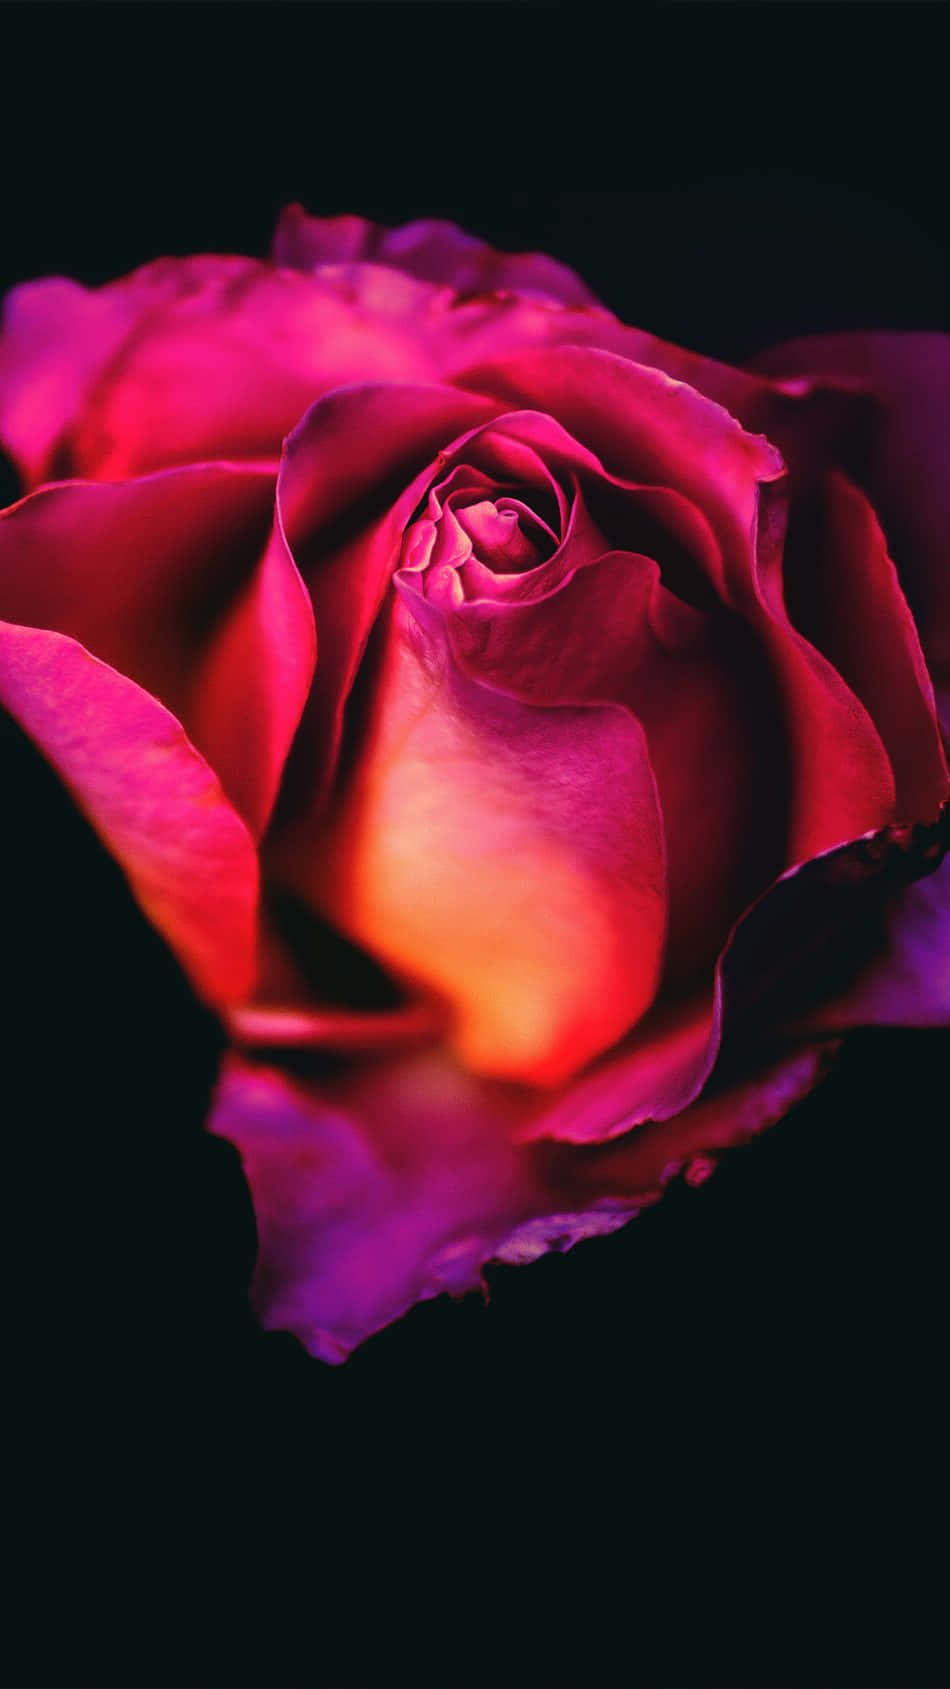 A Pink Rose Is Shown Against A Black Background Wallpaper